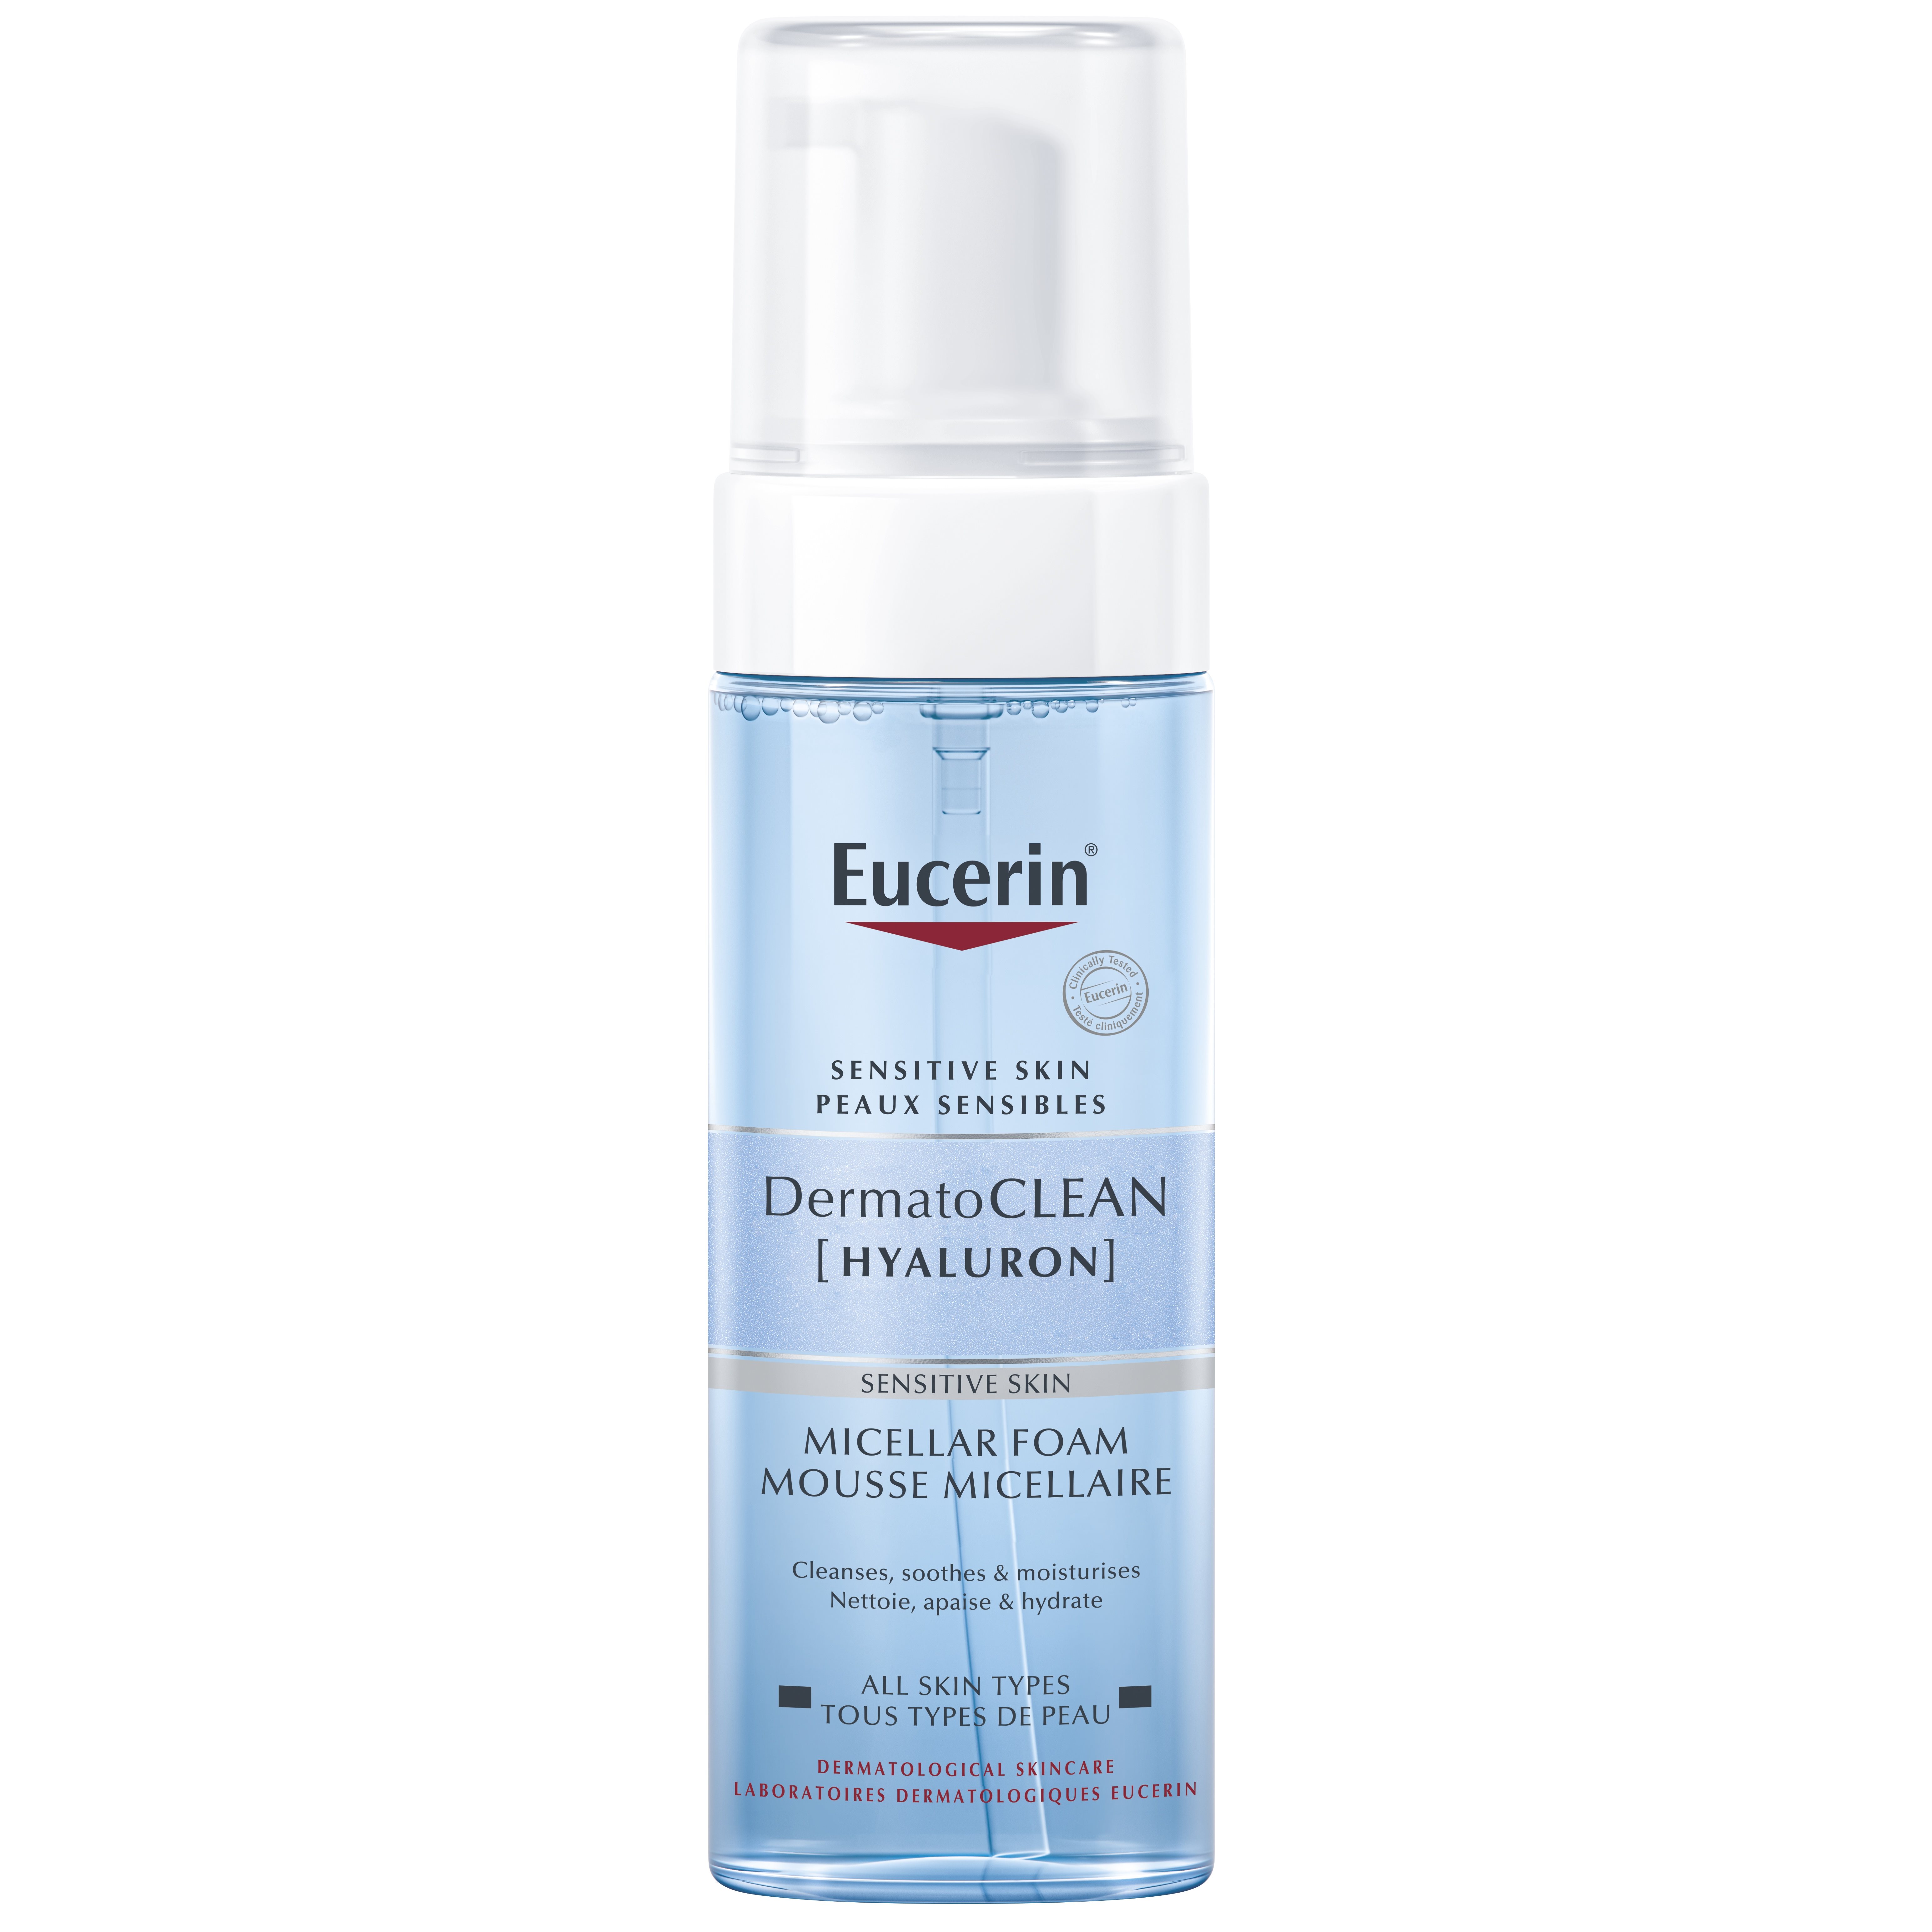 Eucerin DermatoCLEAN [HYALURON] Mousse Micellaire - 150ml